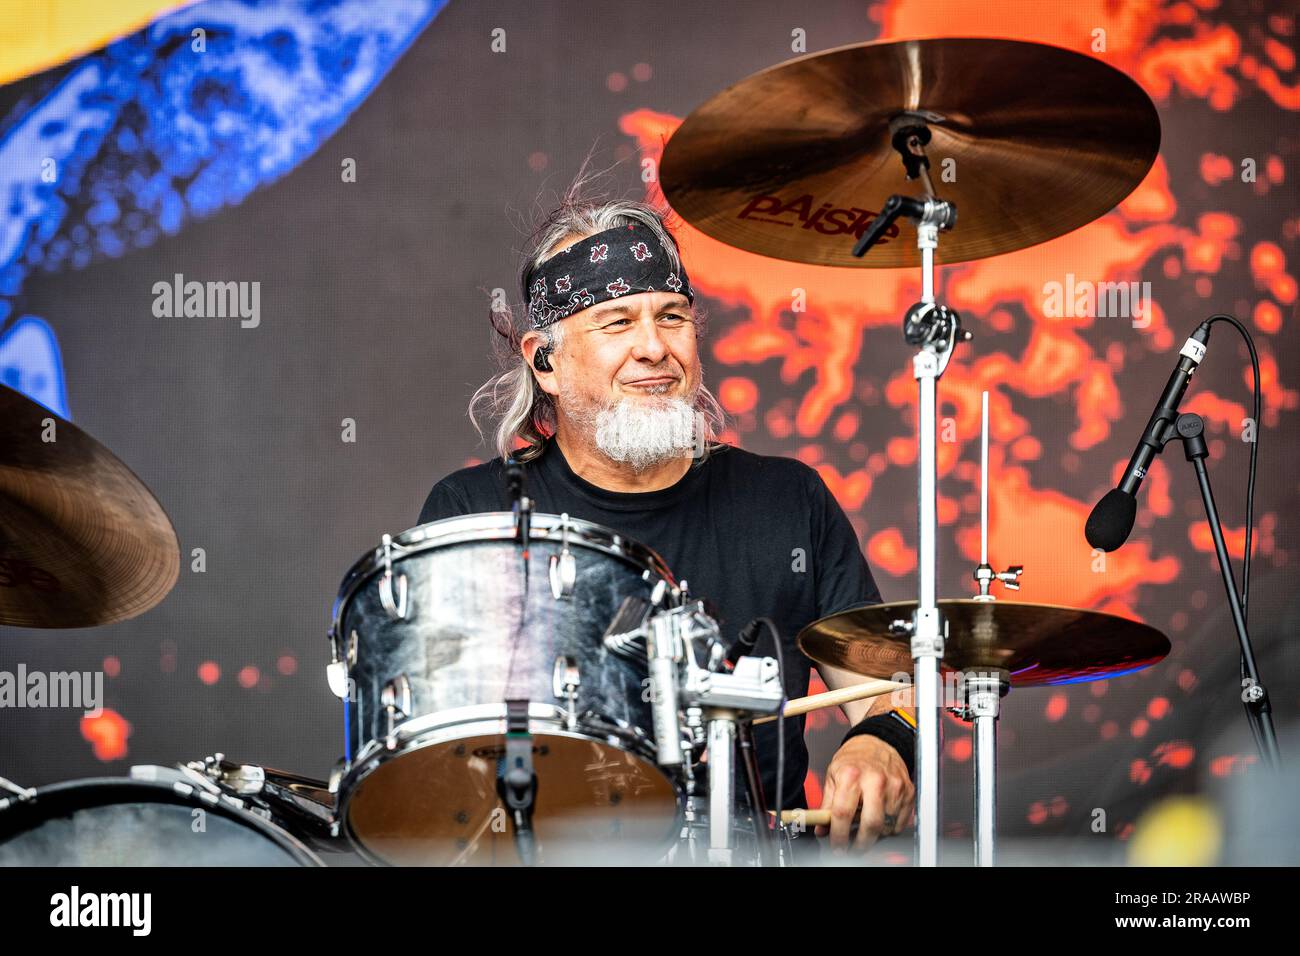 Oslo, Norway. 22nd, June 2023. The American rock band Clutch performs a  live concert during the Norwegian music festival Tons of Rock 2023 in Oslo.  Here drummer Jean-Paul Gaster is seen live